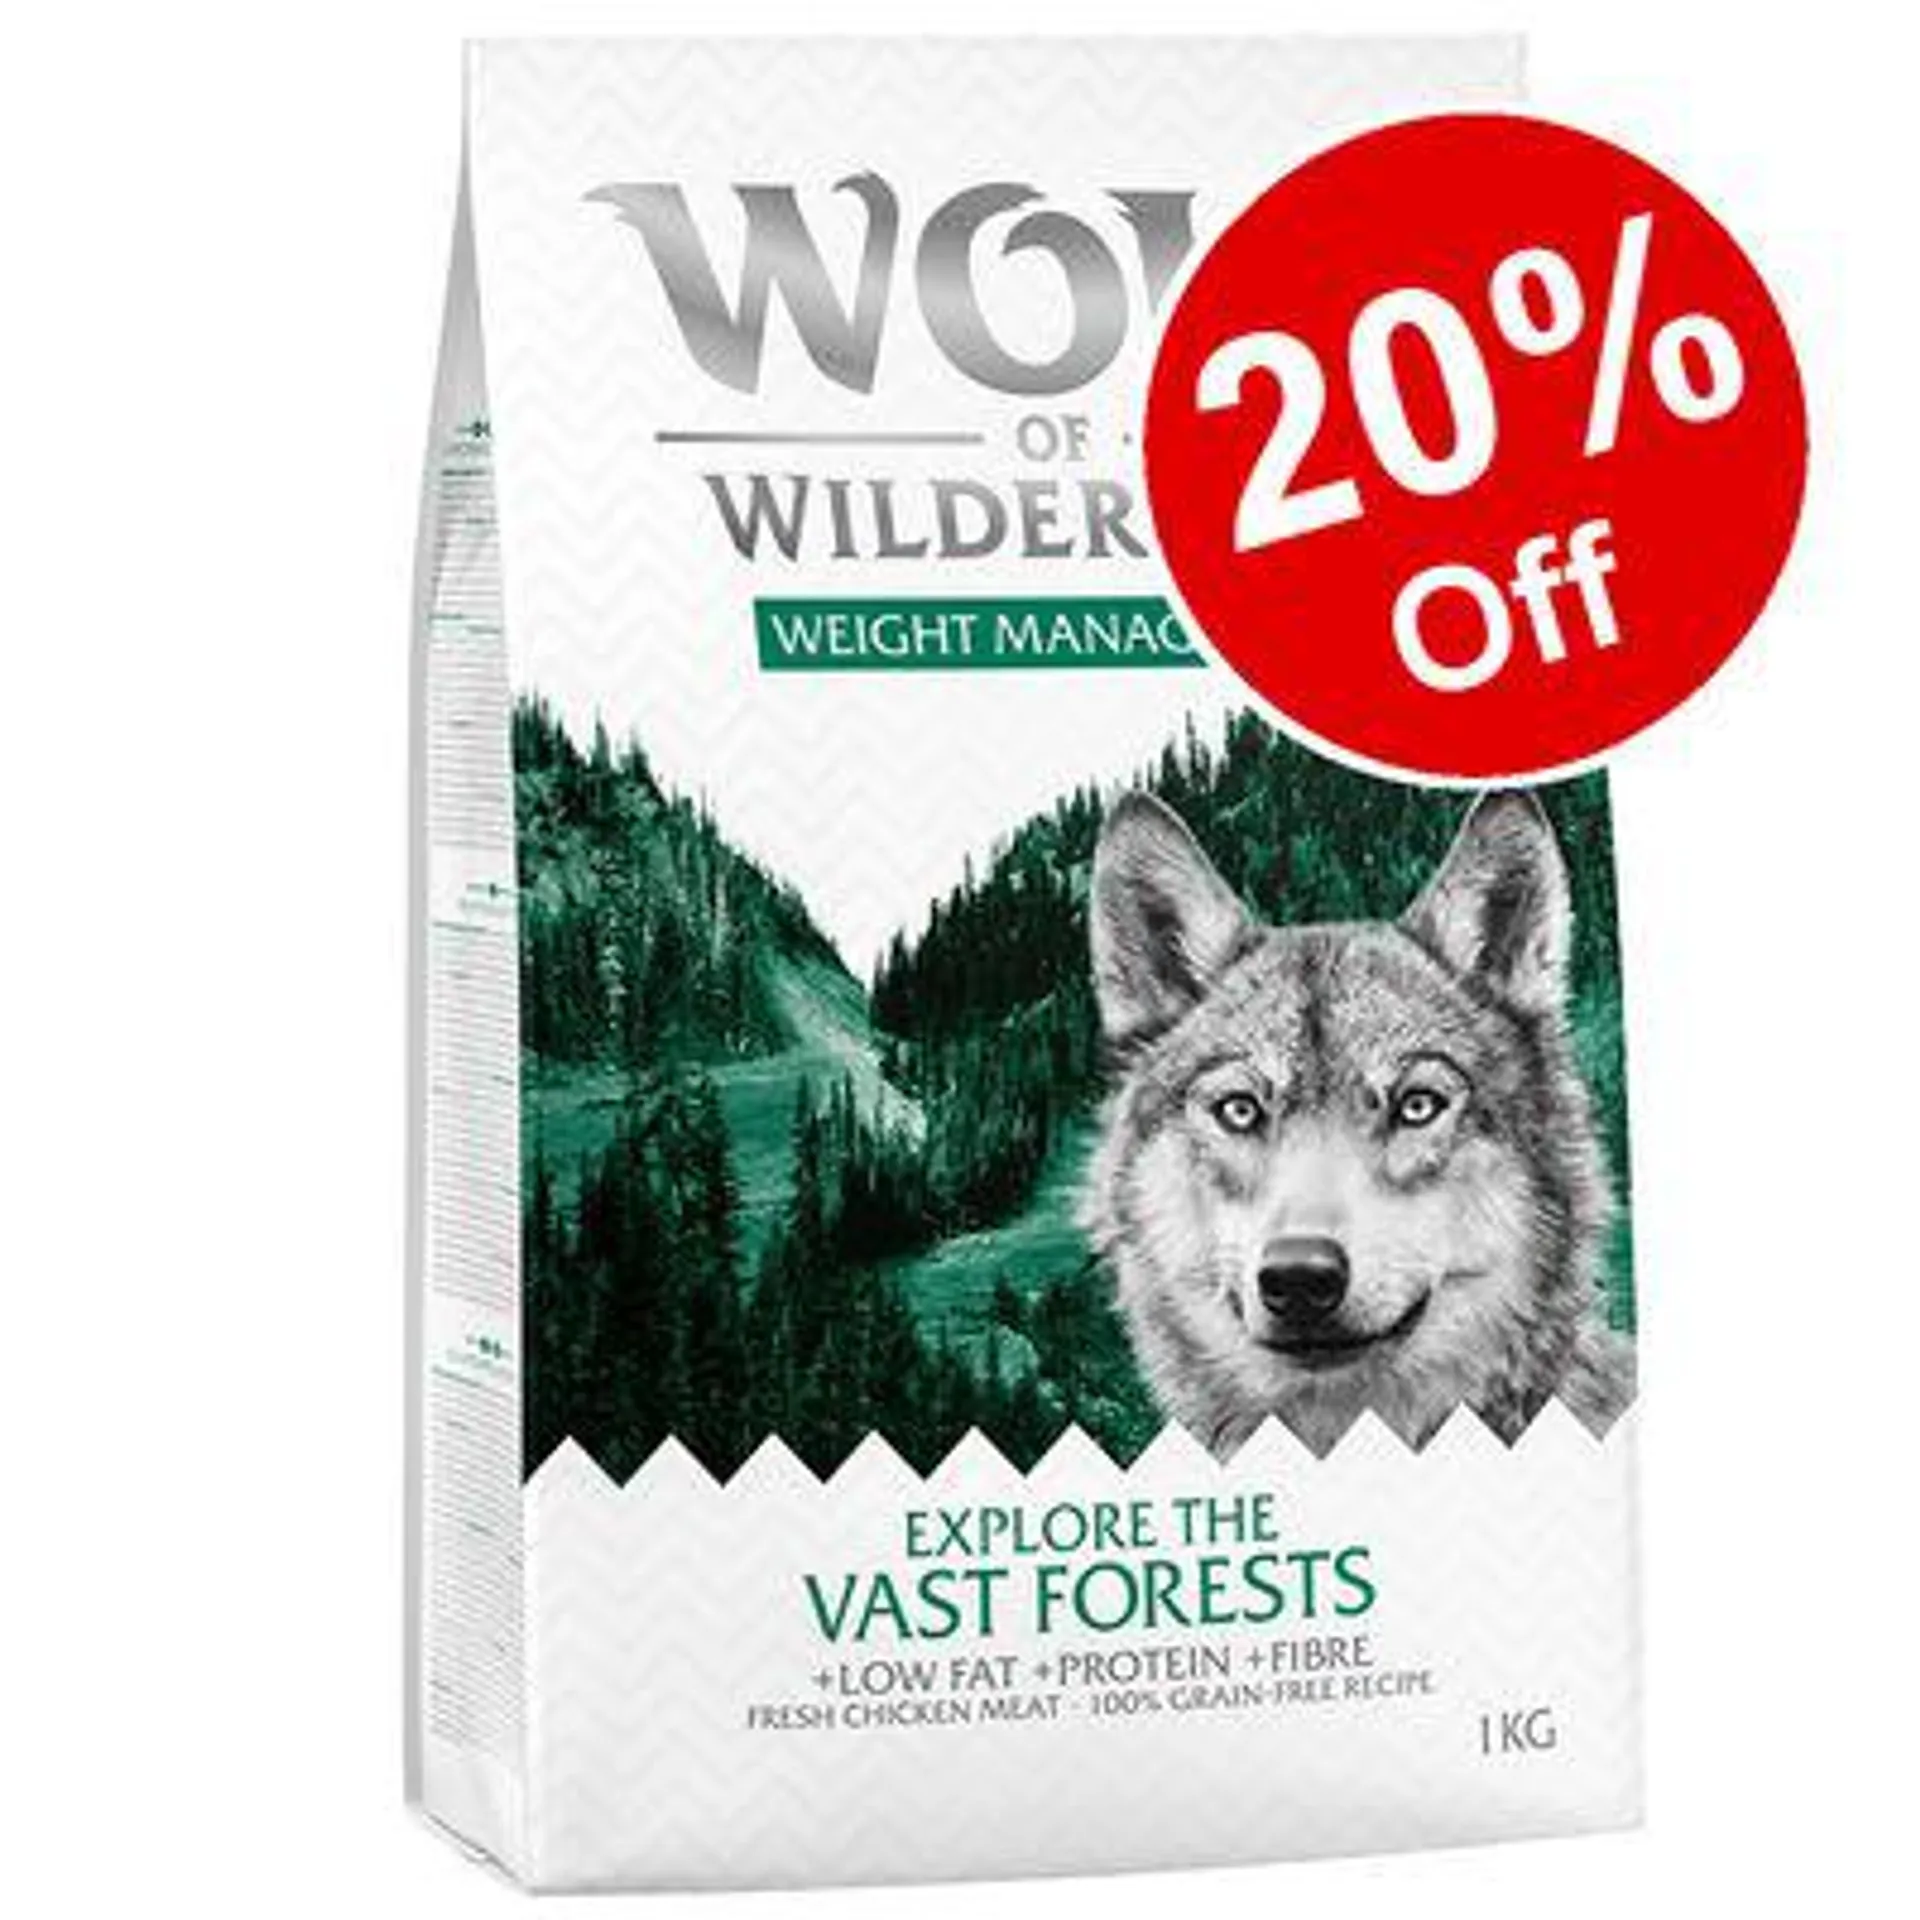 1kg Wolf of Wilderness Dry Dog Food - 20% Off!*